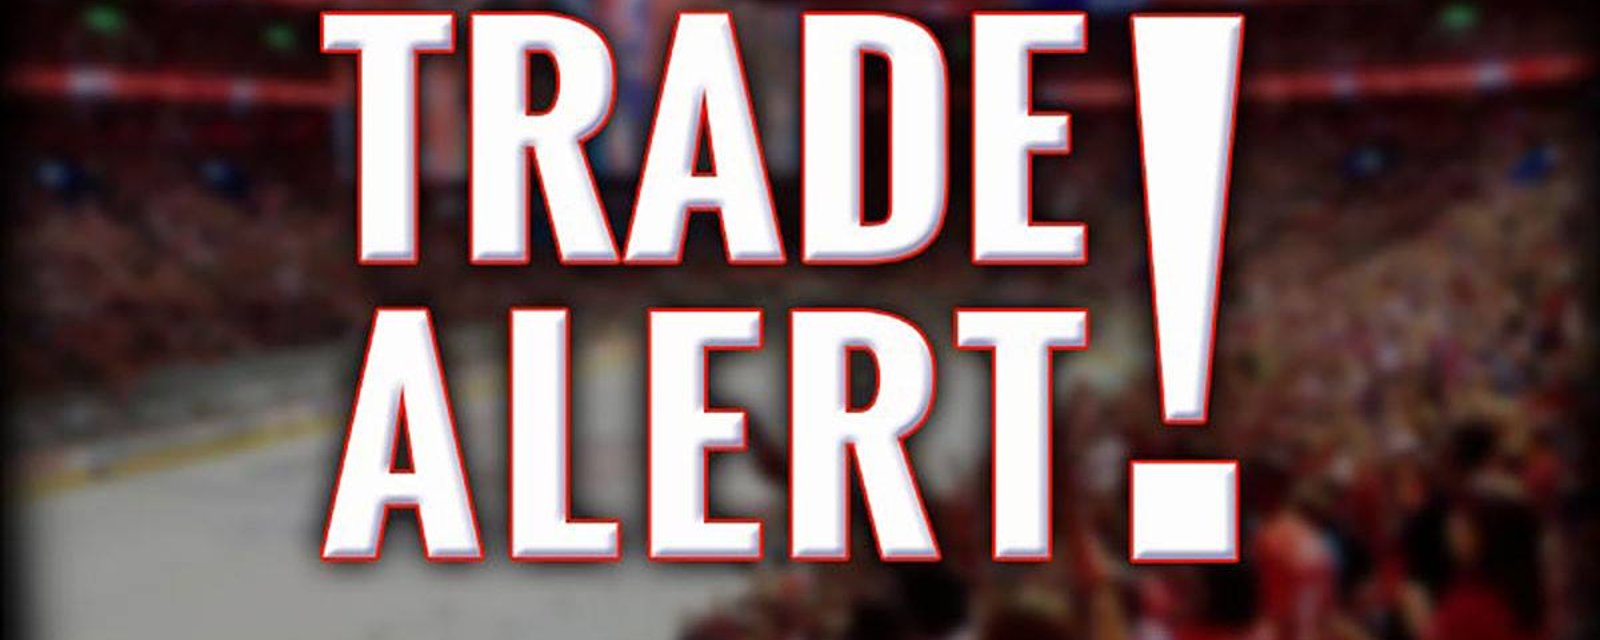 Trade alert: Canadiens make another move before season opener! 